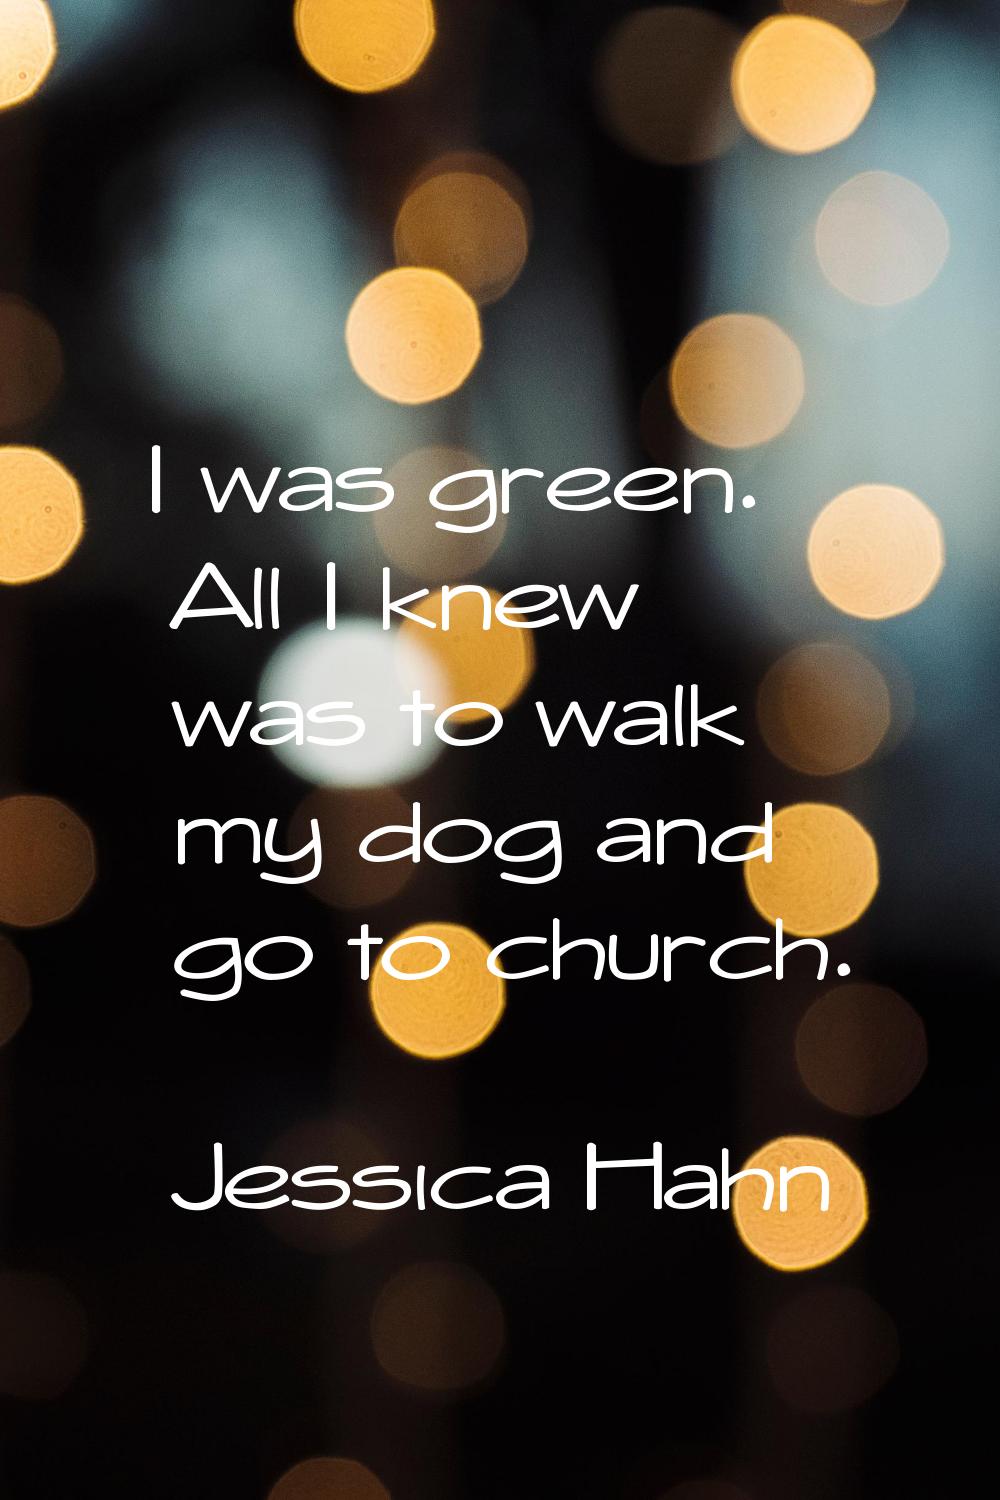 I was green. All I knew was to walk my dog and go to church.